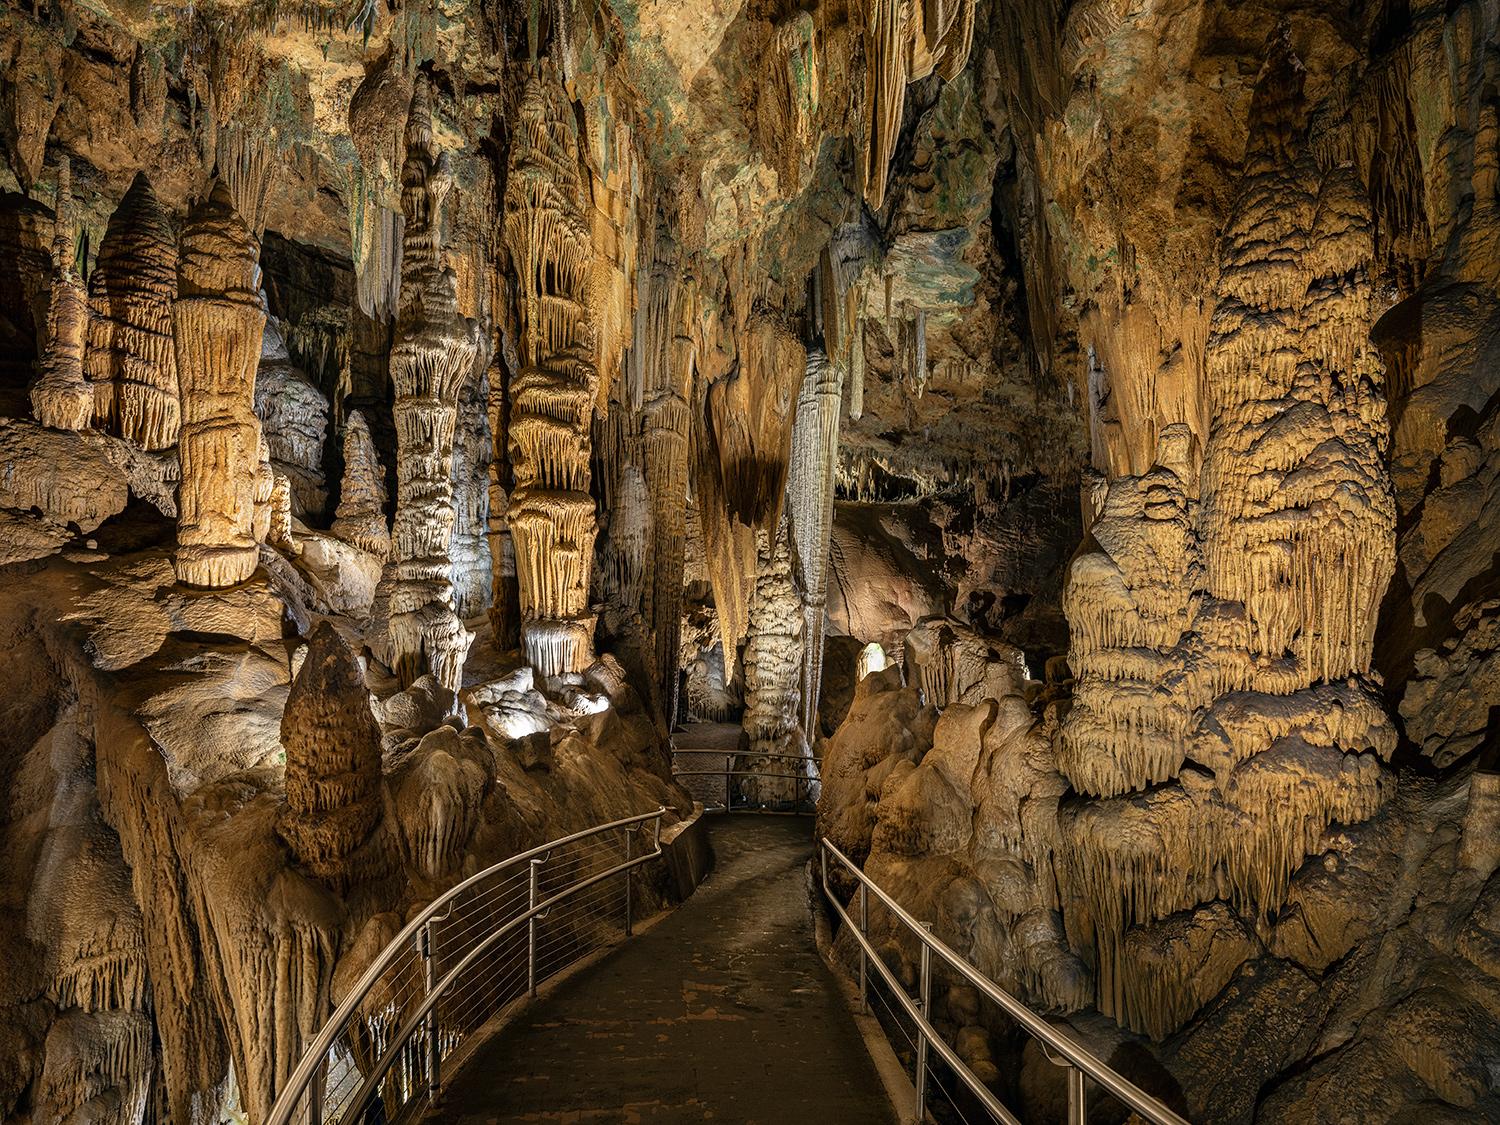 "RESPLENDENCE OF ANTIPODES
In the scope of civilization, the subterranean realm remains largely unchanged. Isolated in darkness for hundreds of millions of years, the sunless underworld encompasses majestic ancient formations gradually eroded into